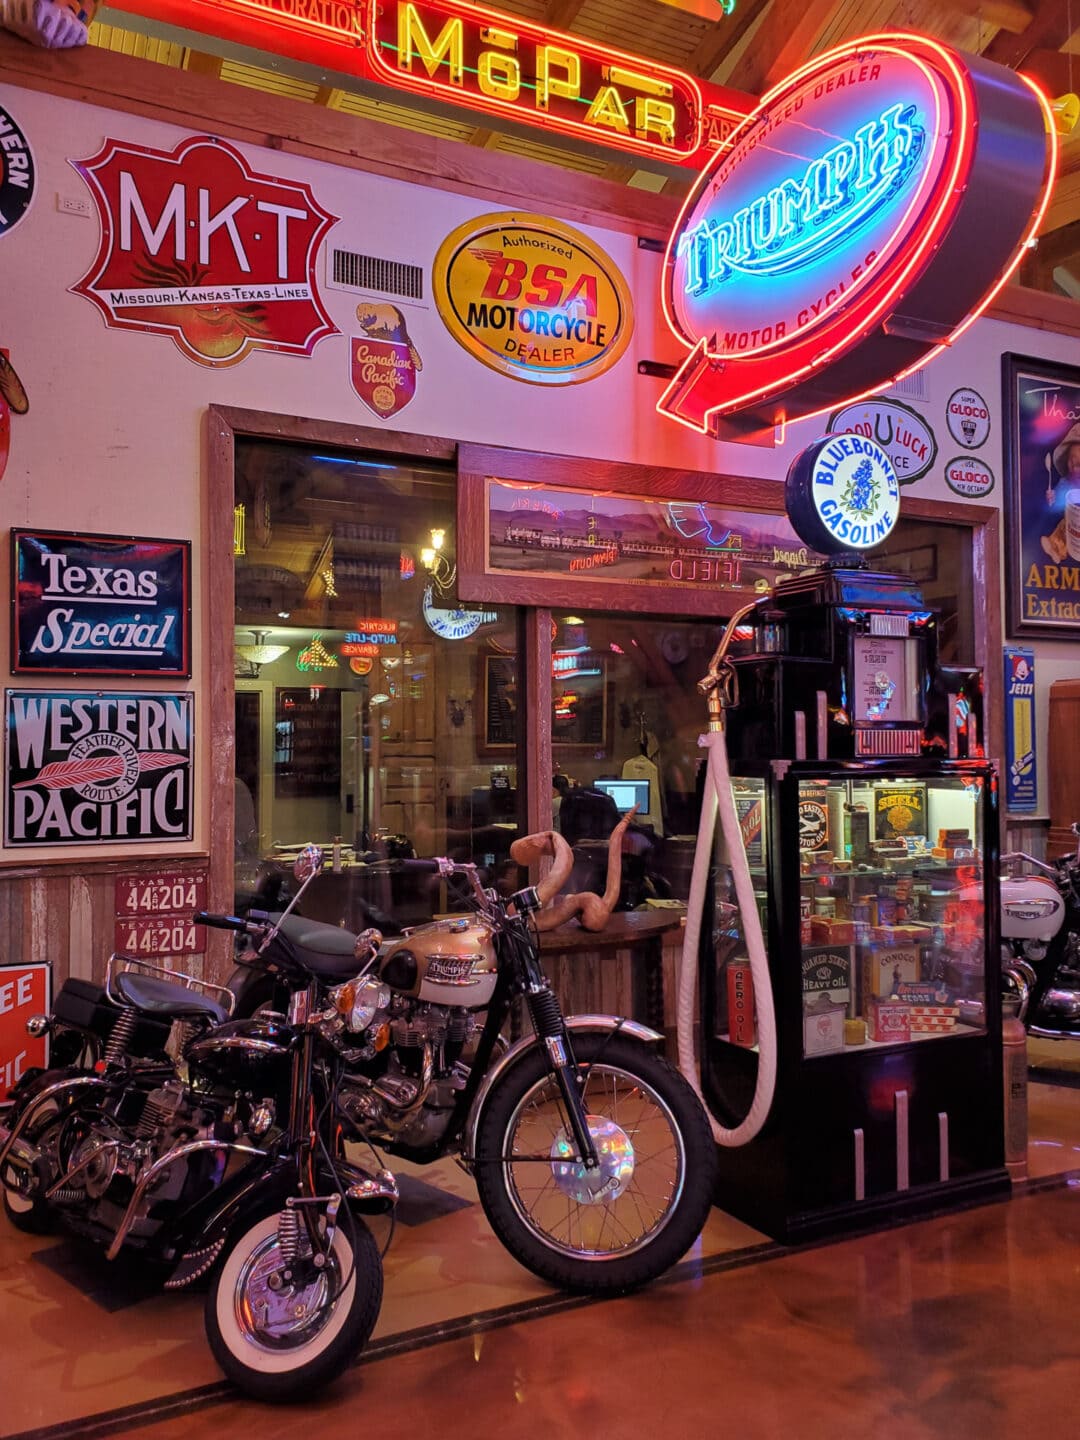 Triumph motorcycles and a vintage gas pump in a room filled with neon signs